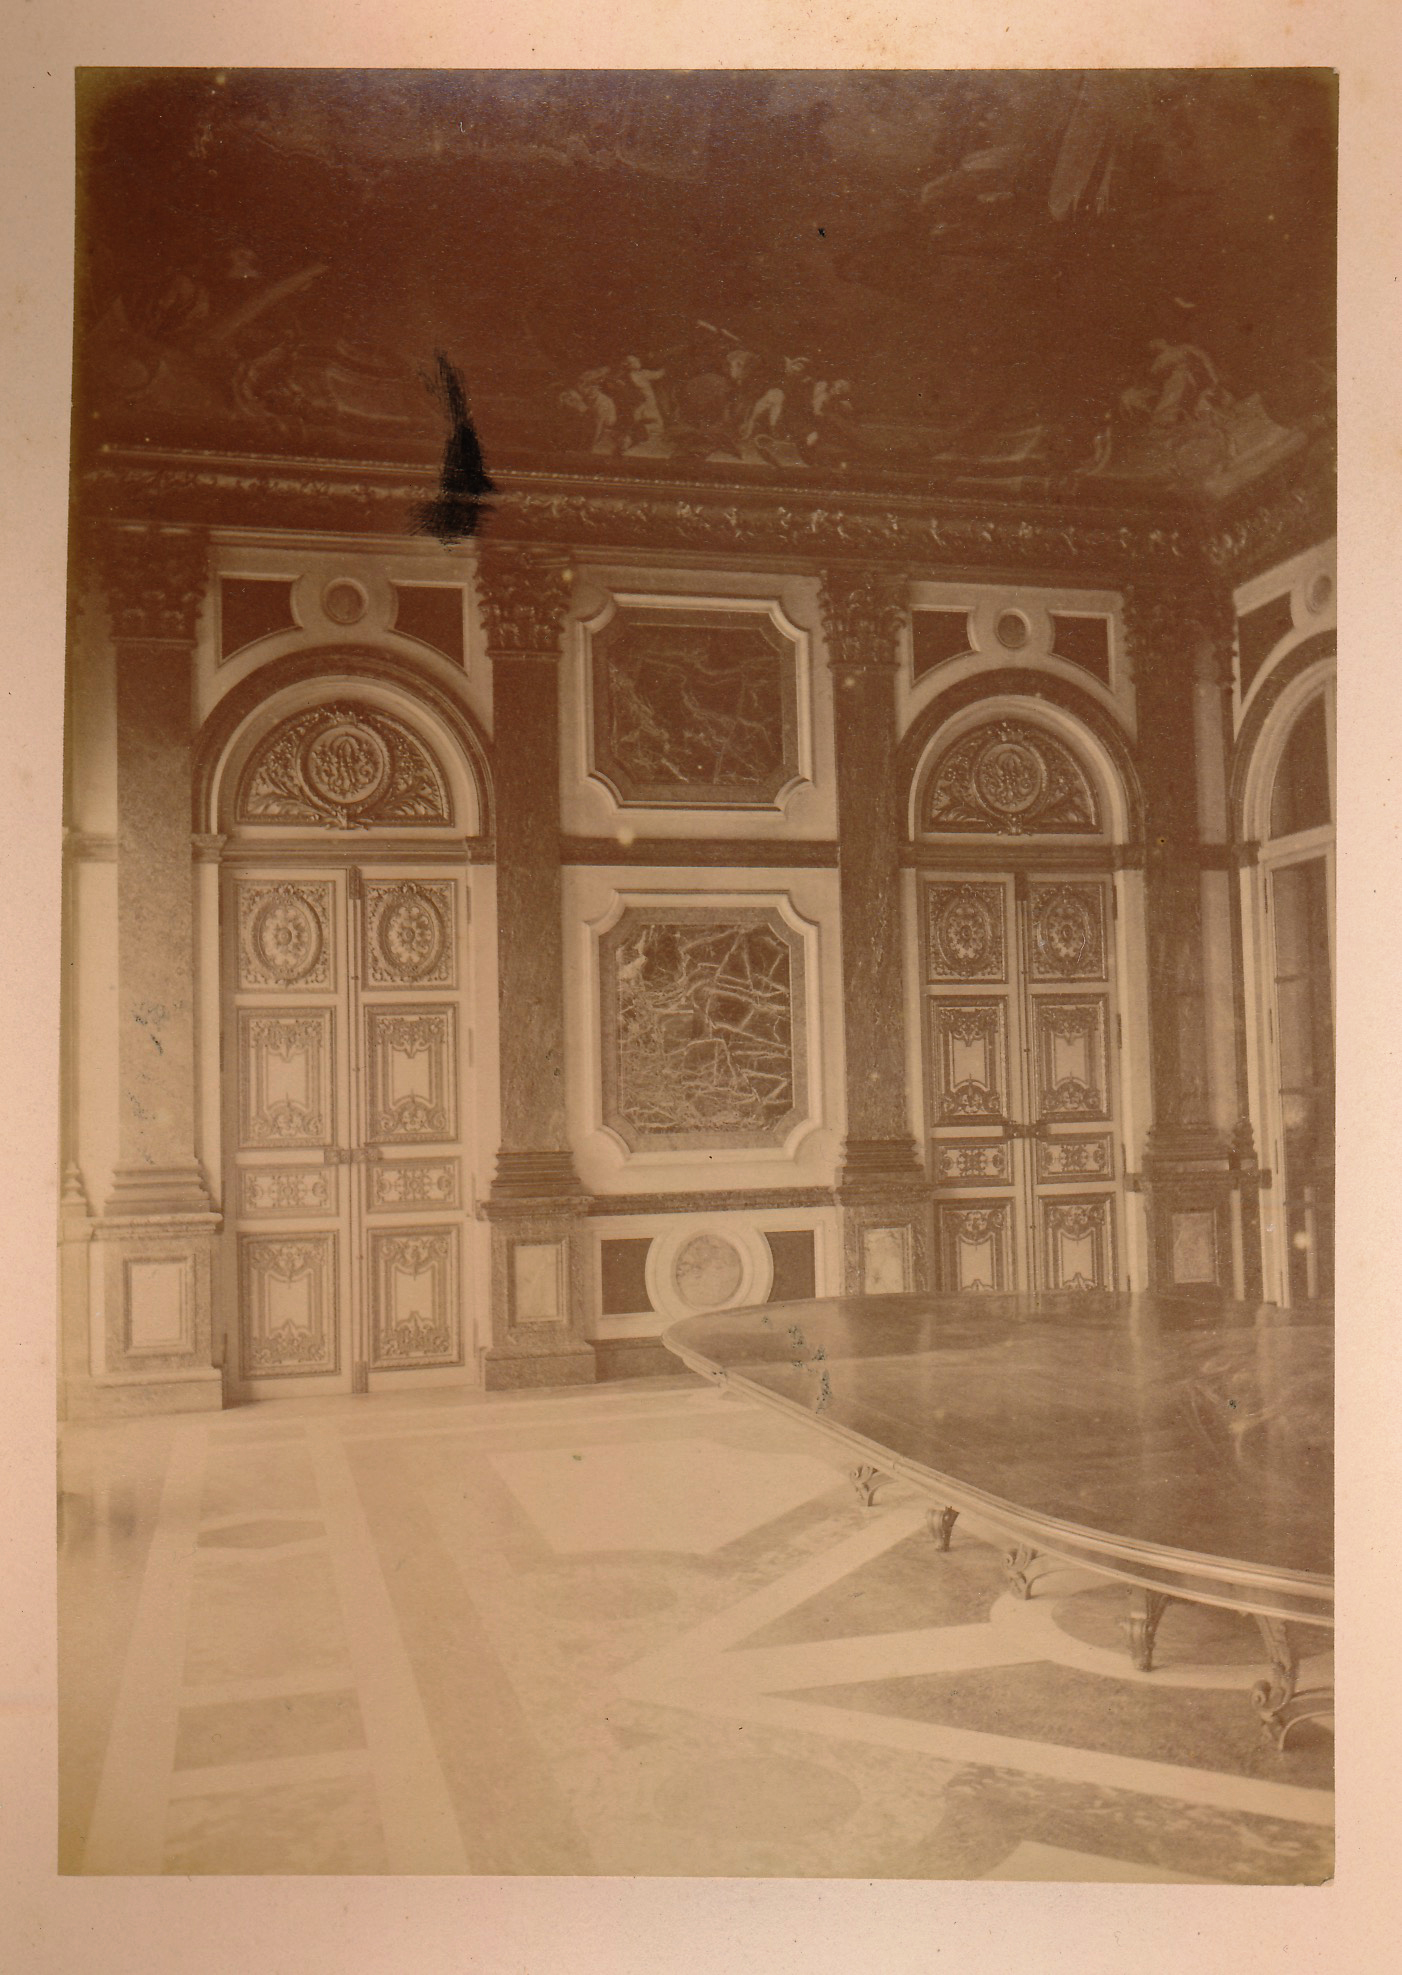 Photograph of one the Hôtel Pontalba’s salons in 1875 when it was sold to the Rothschilds where we can see similar capitals to ours but with two more decoration ranks